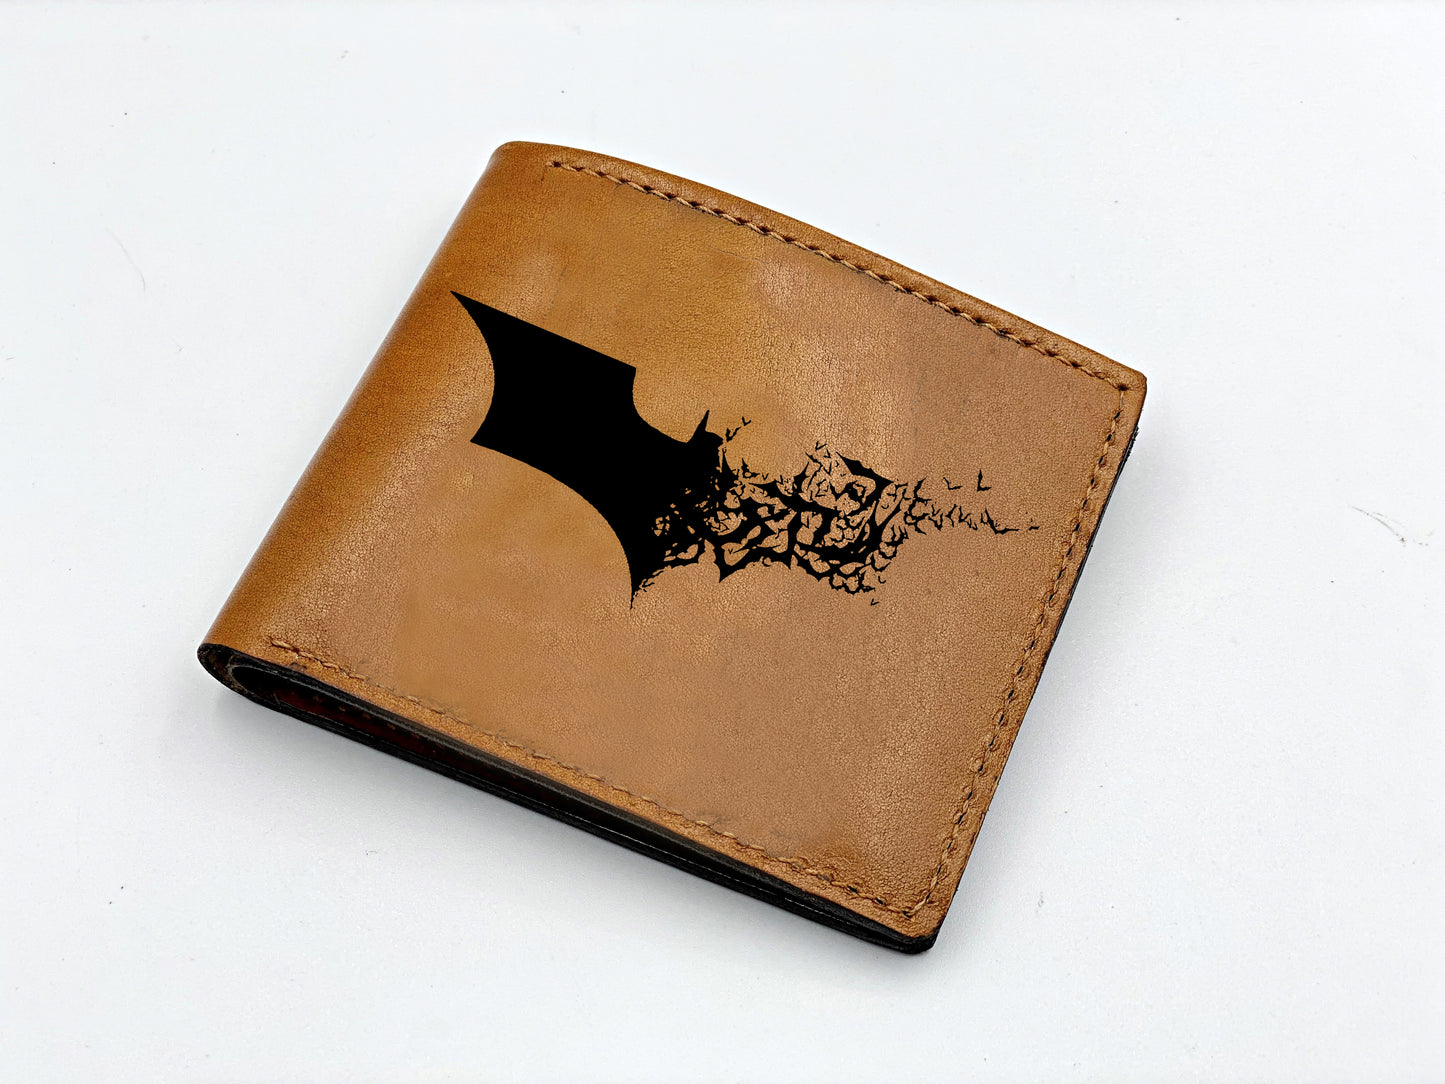 Mayan Corner - Superheroes leather gift idea, customized batman leather wallet, superheroes present for dad, cool wallet for brother, leather anniversary gift idea